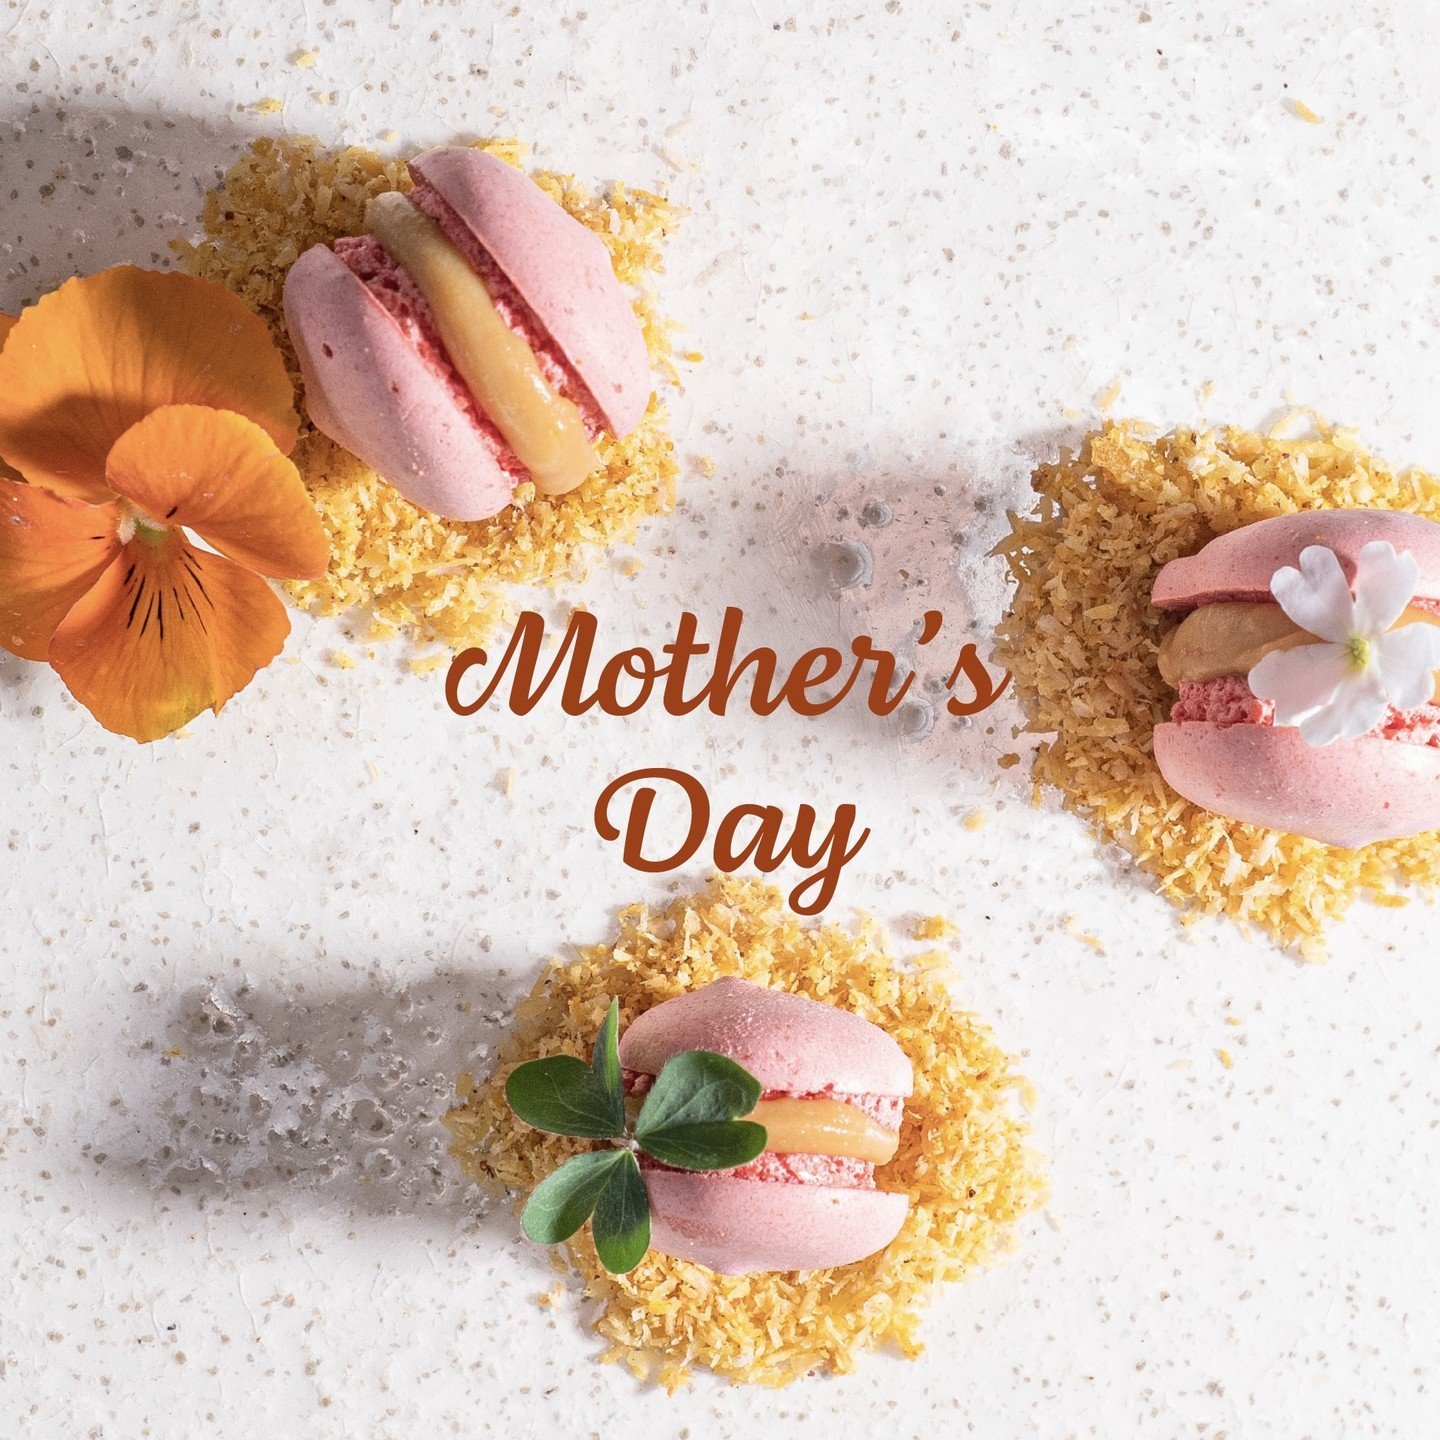 THE PERFECT MEAL

While every day should be spent celebrating all the important women in our lives, Mother&rsquo;s Day is the perfect opportunity to pull out all the stops and make the day extra special. Celebrate the mothers, grandmothers and other 